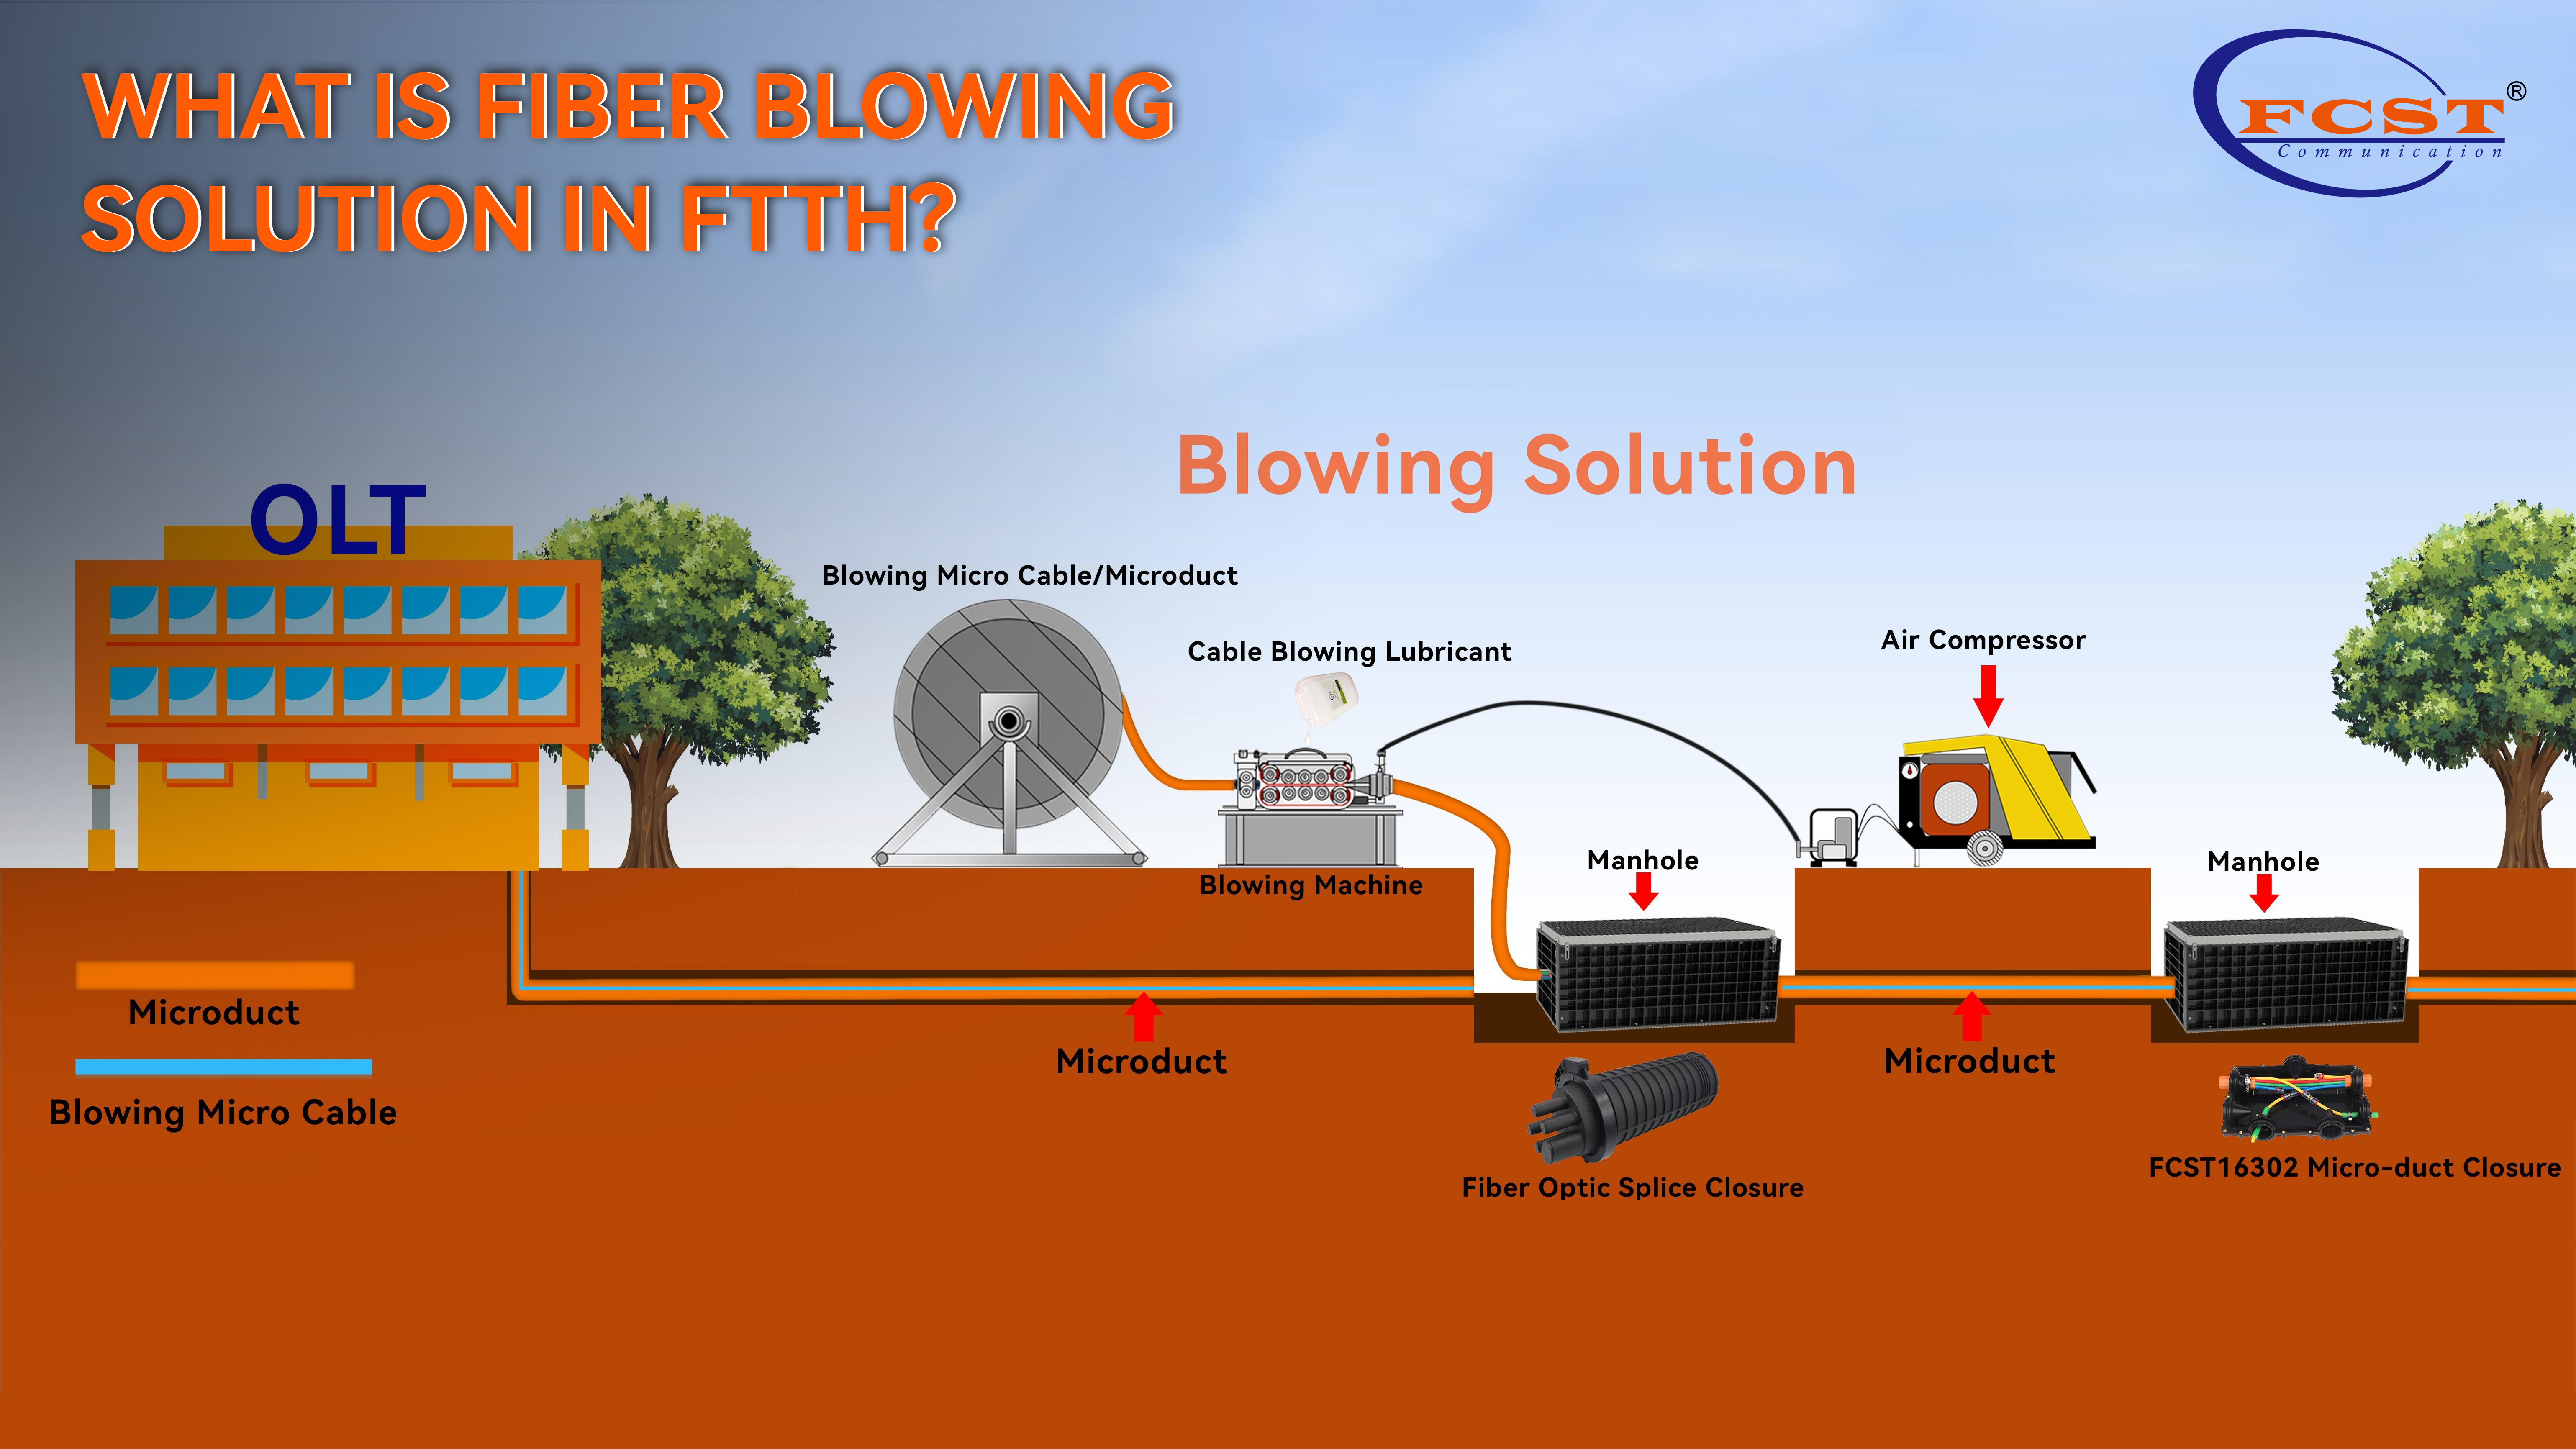 What Is Fiber Blowing Solution In FTTH?